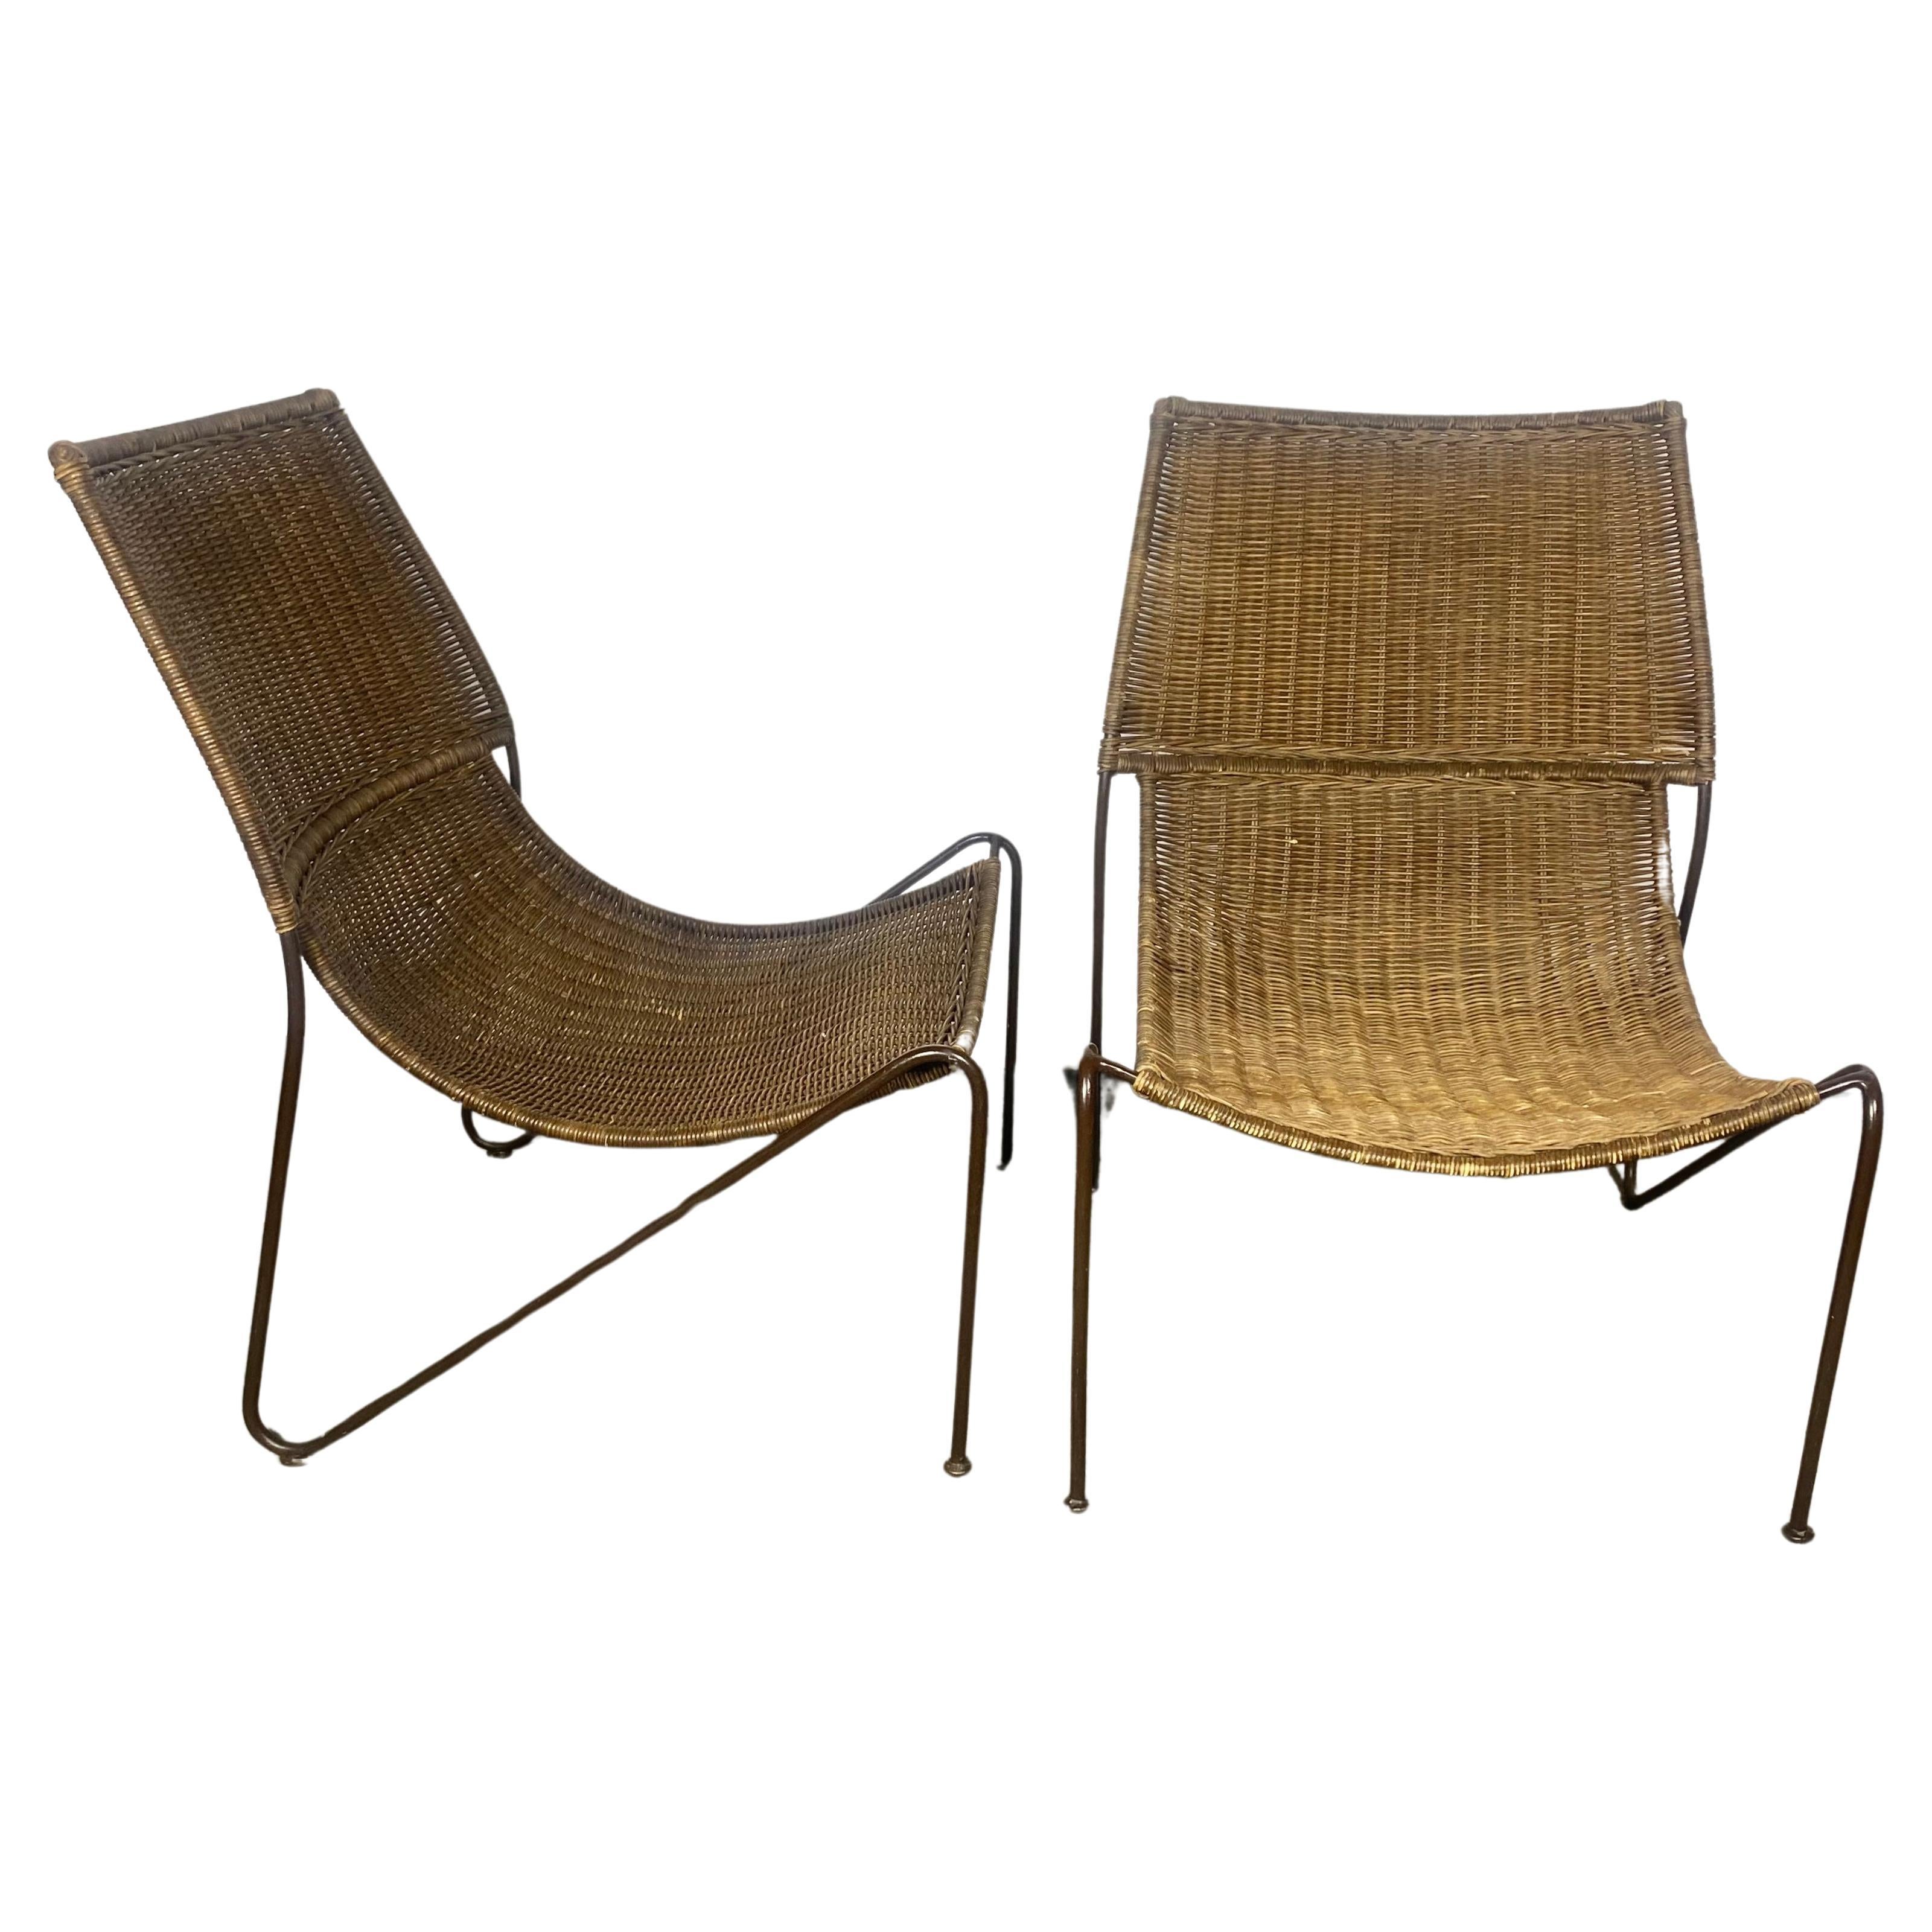 Classic Mid Century Modern Iron and Wicker Sling , lounge chairs .Weinberg Style For Sale